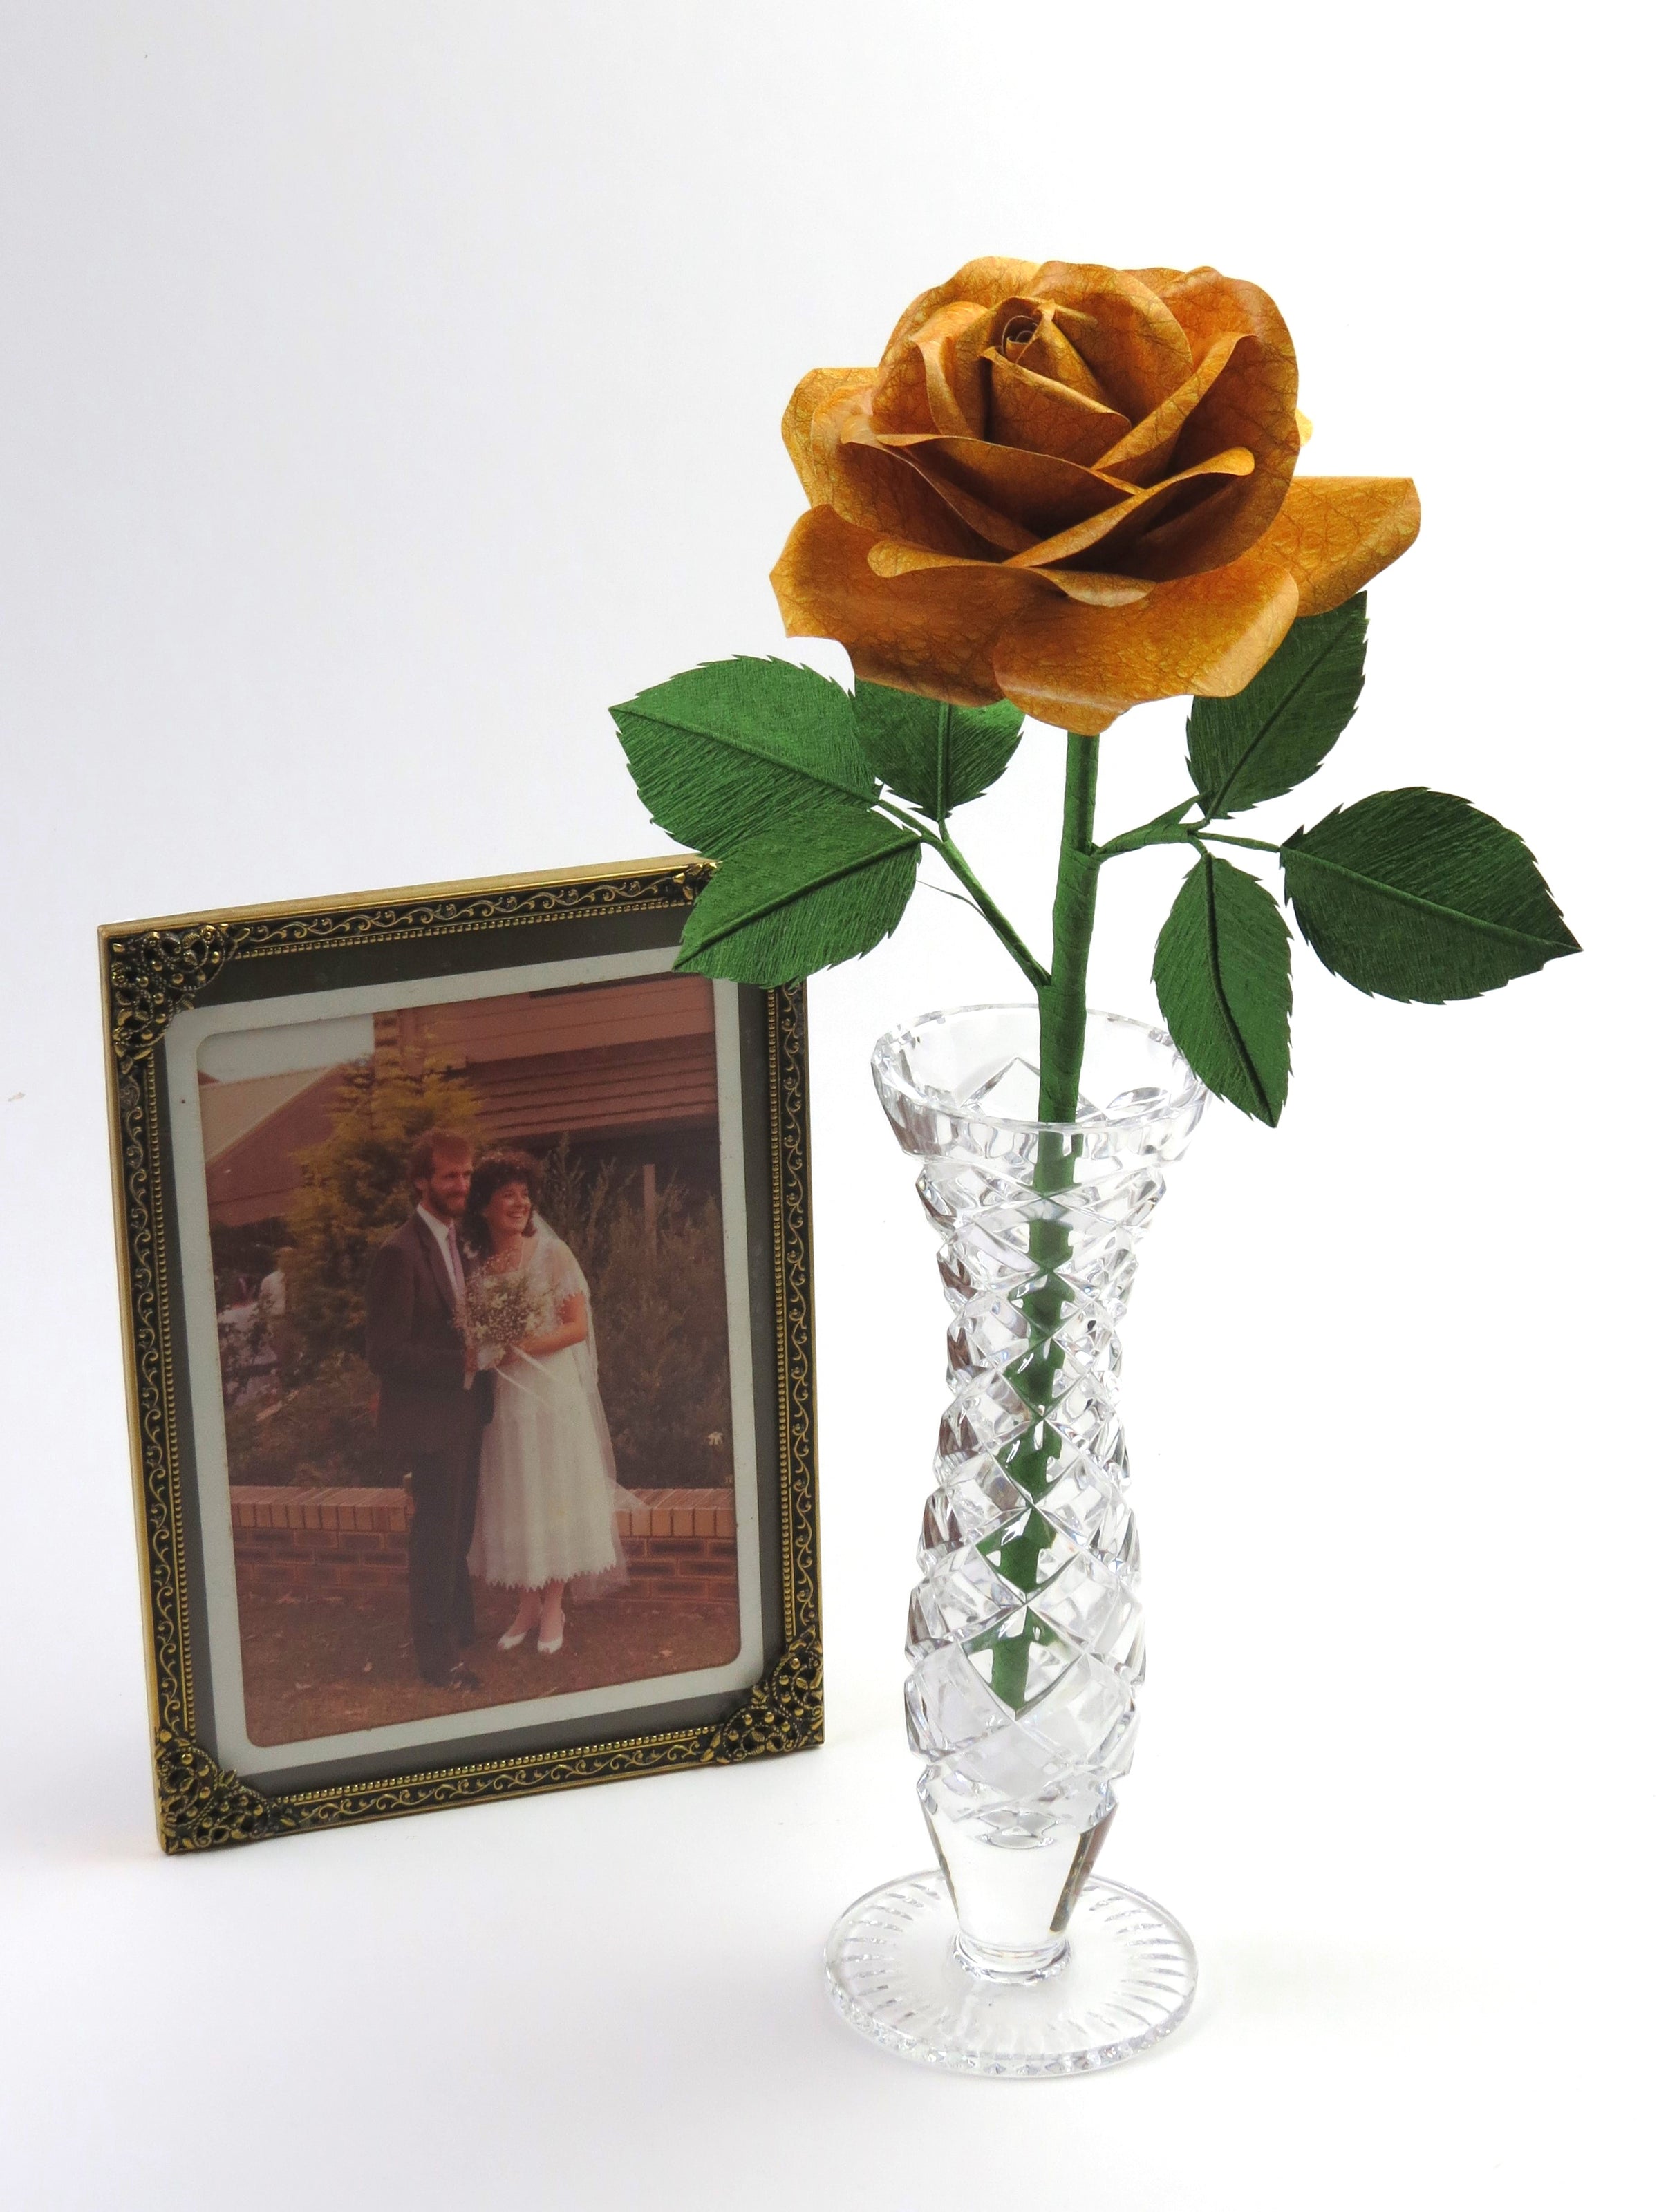 Yellow leather grain paper rose with six green leaves standing in a slender glass vase with a framed wedding photo of a happy couple standing beside it